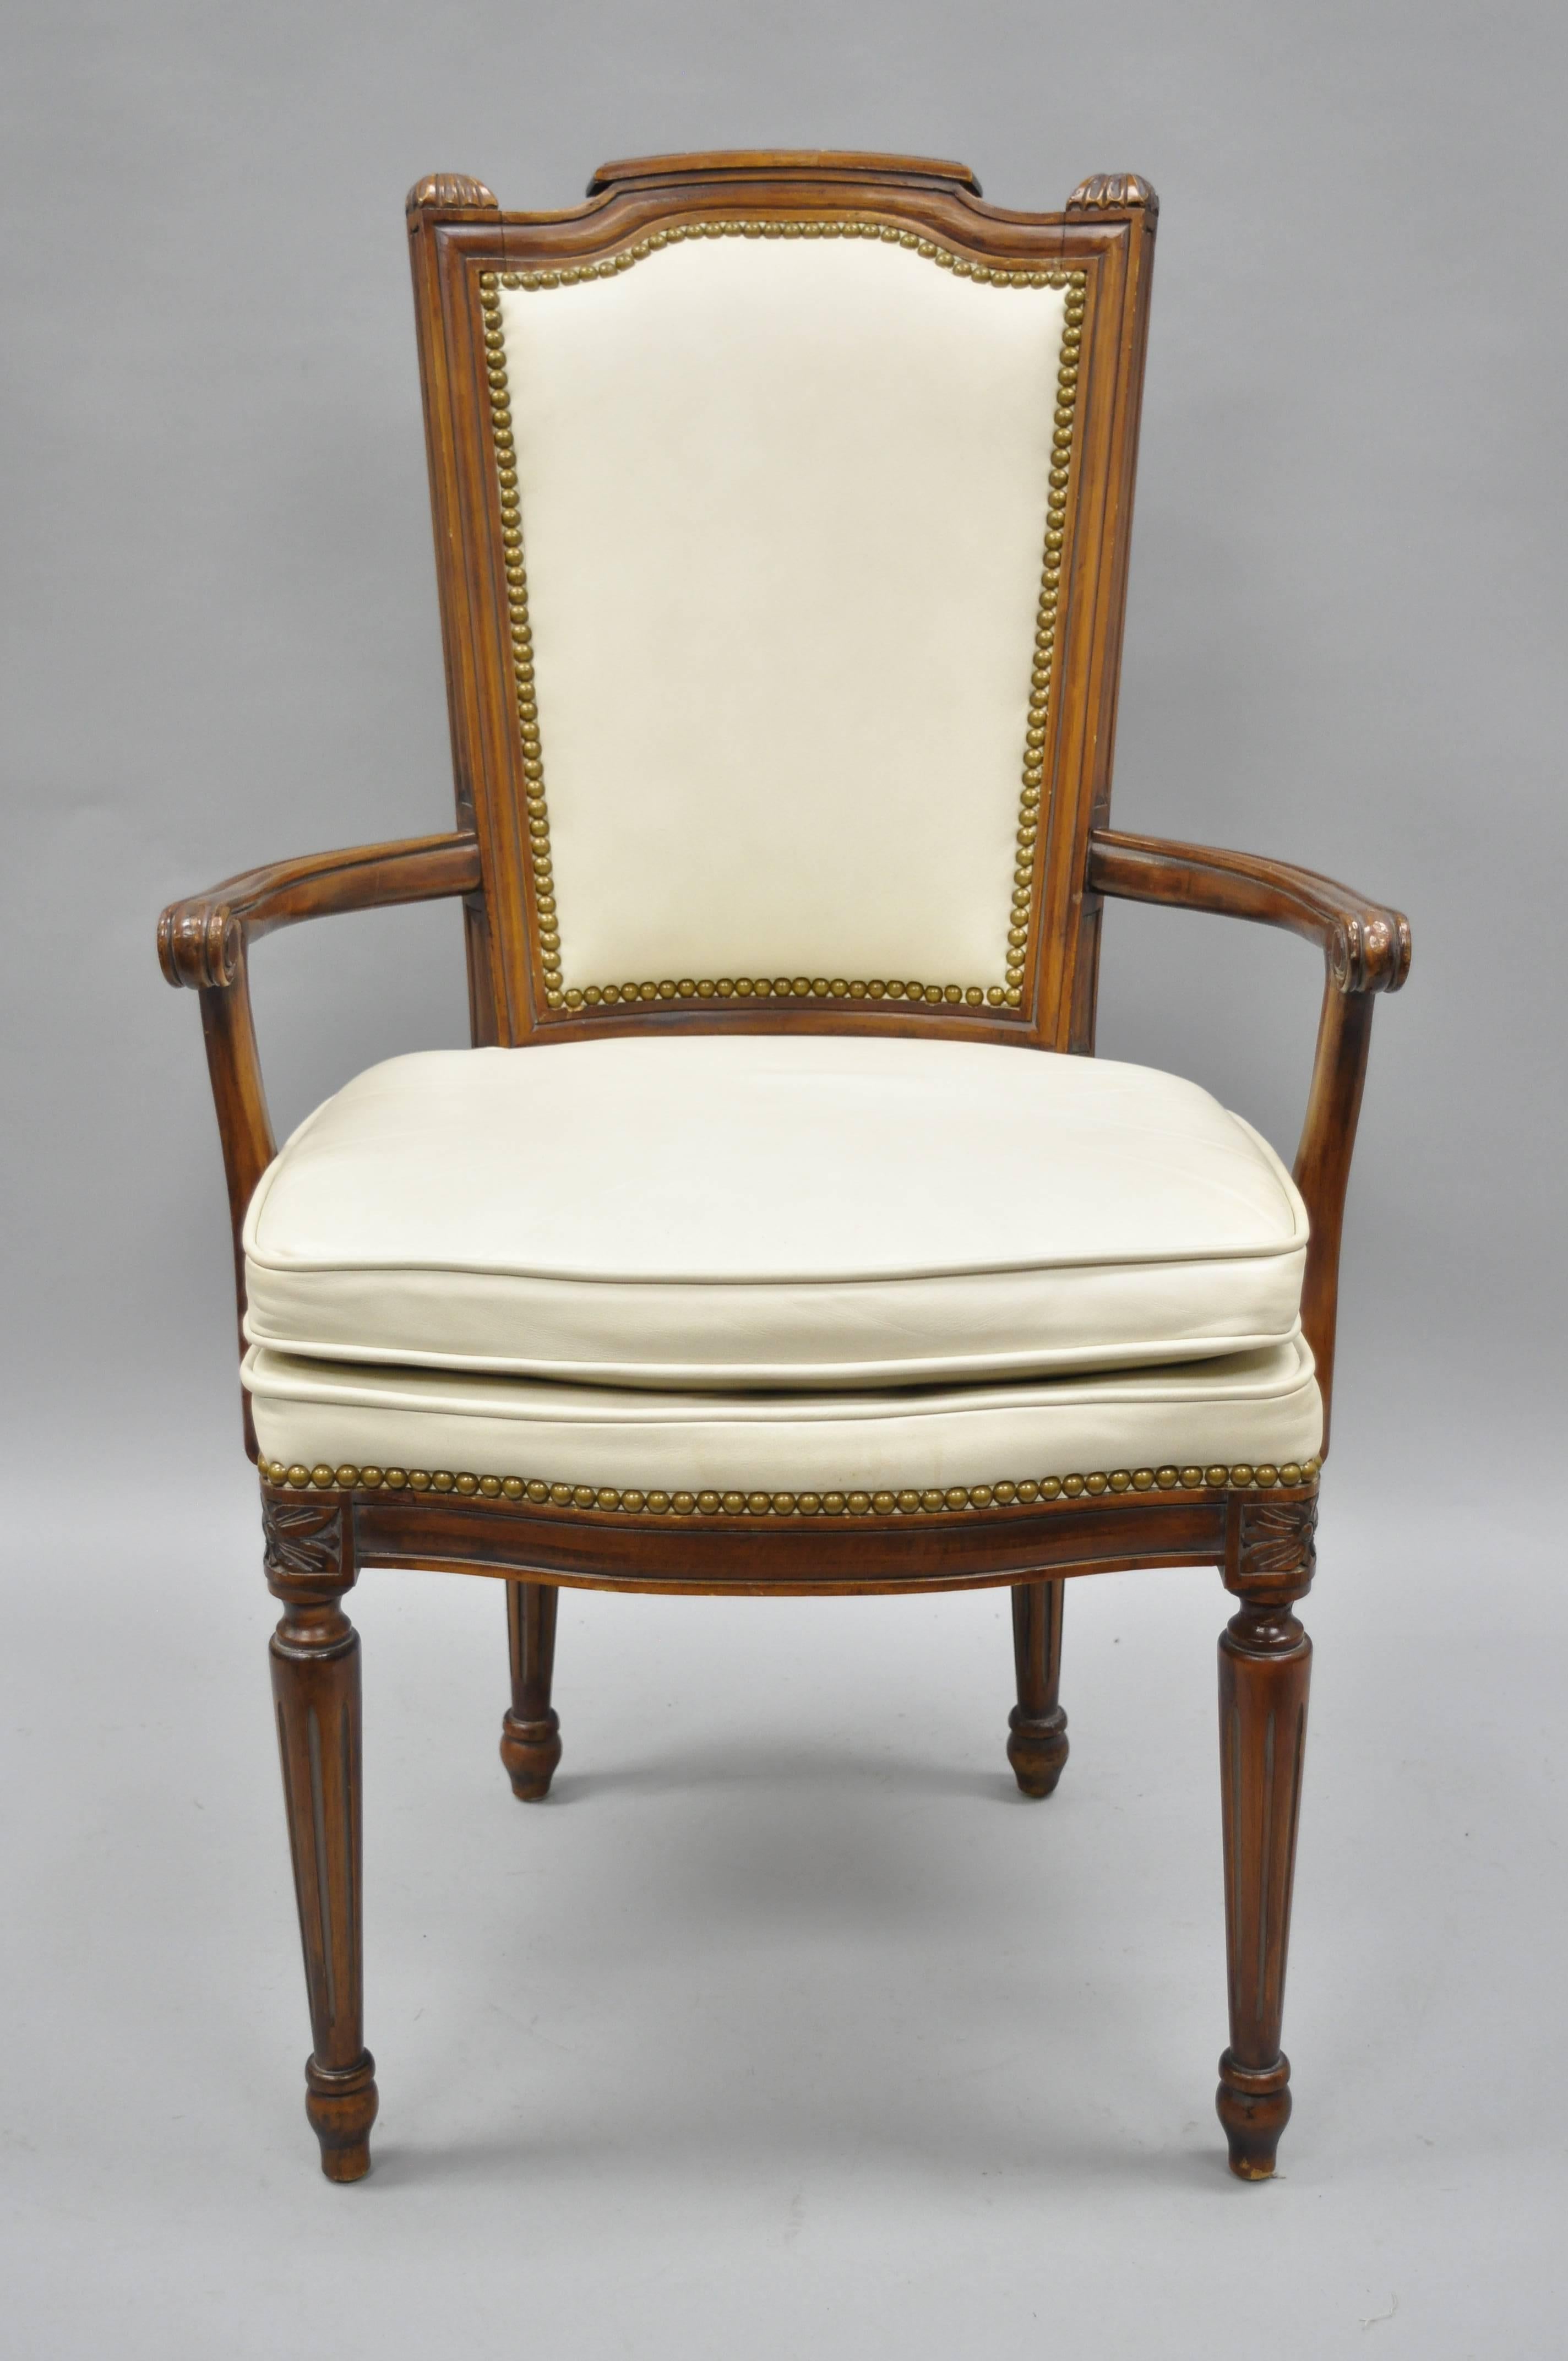 Set of eight French Louis XVI style walnut dining chairs with leather upholstery. Listing includes six side chairs, two armchairs, off white leather upholstery, nailhead trim, solid wood construction, tapered legs, and quality American